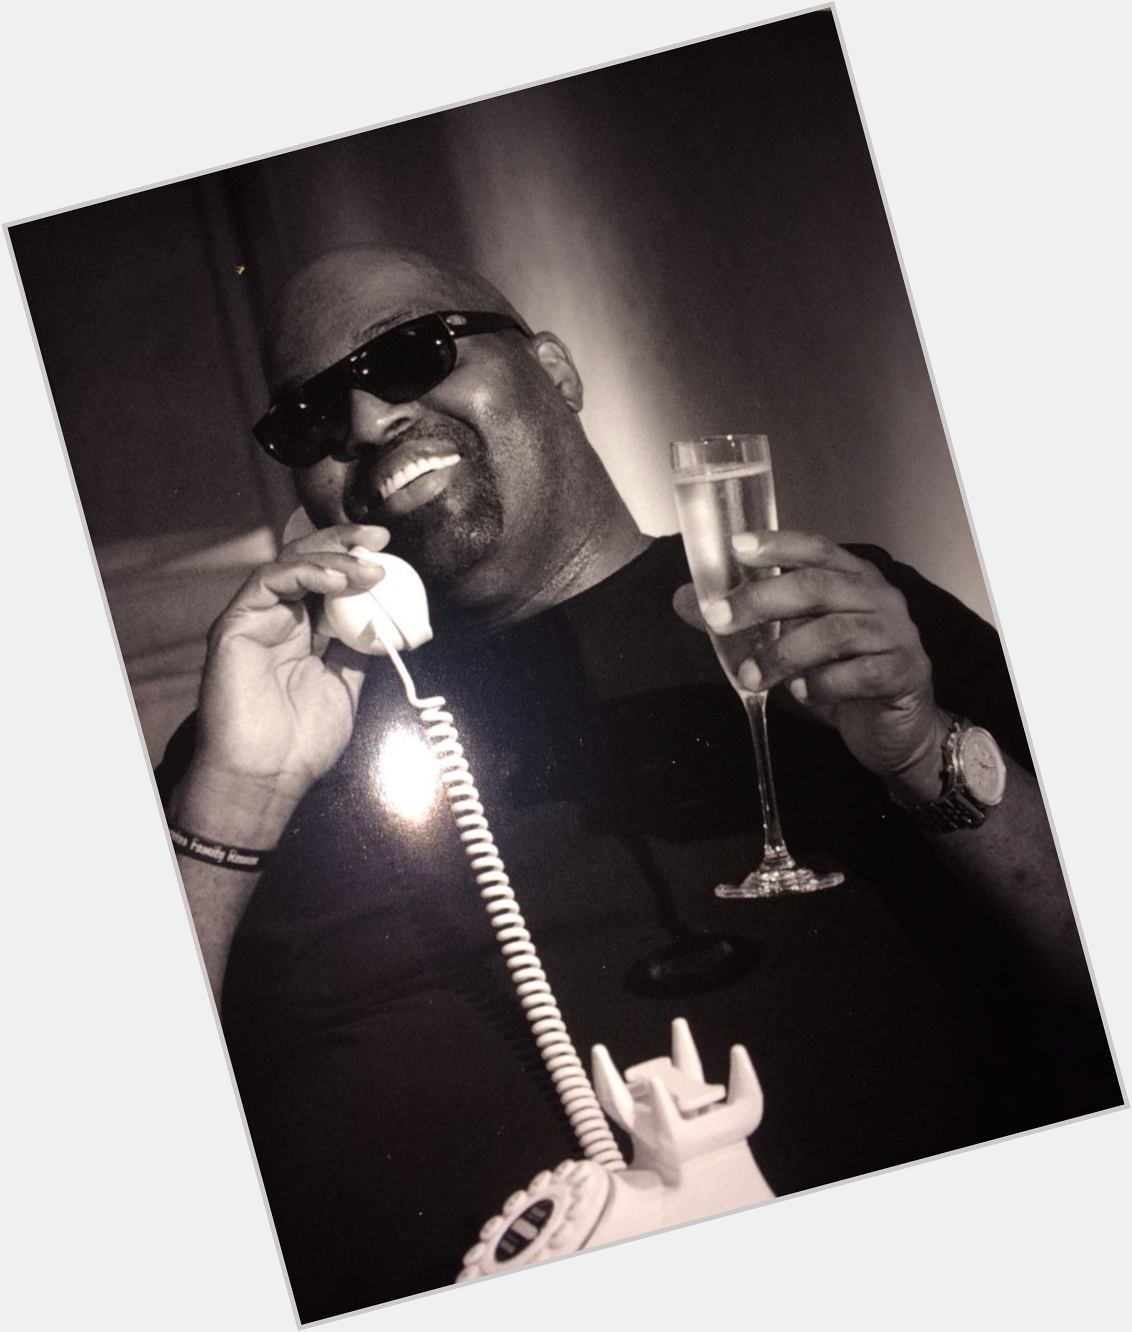 Happy birthday Frankie Knuckles, who would have been 64 today 